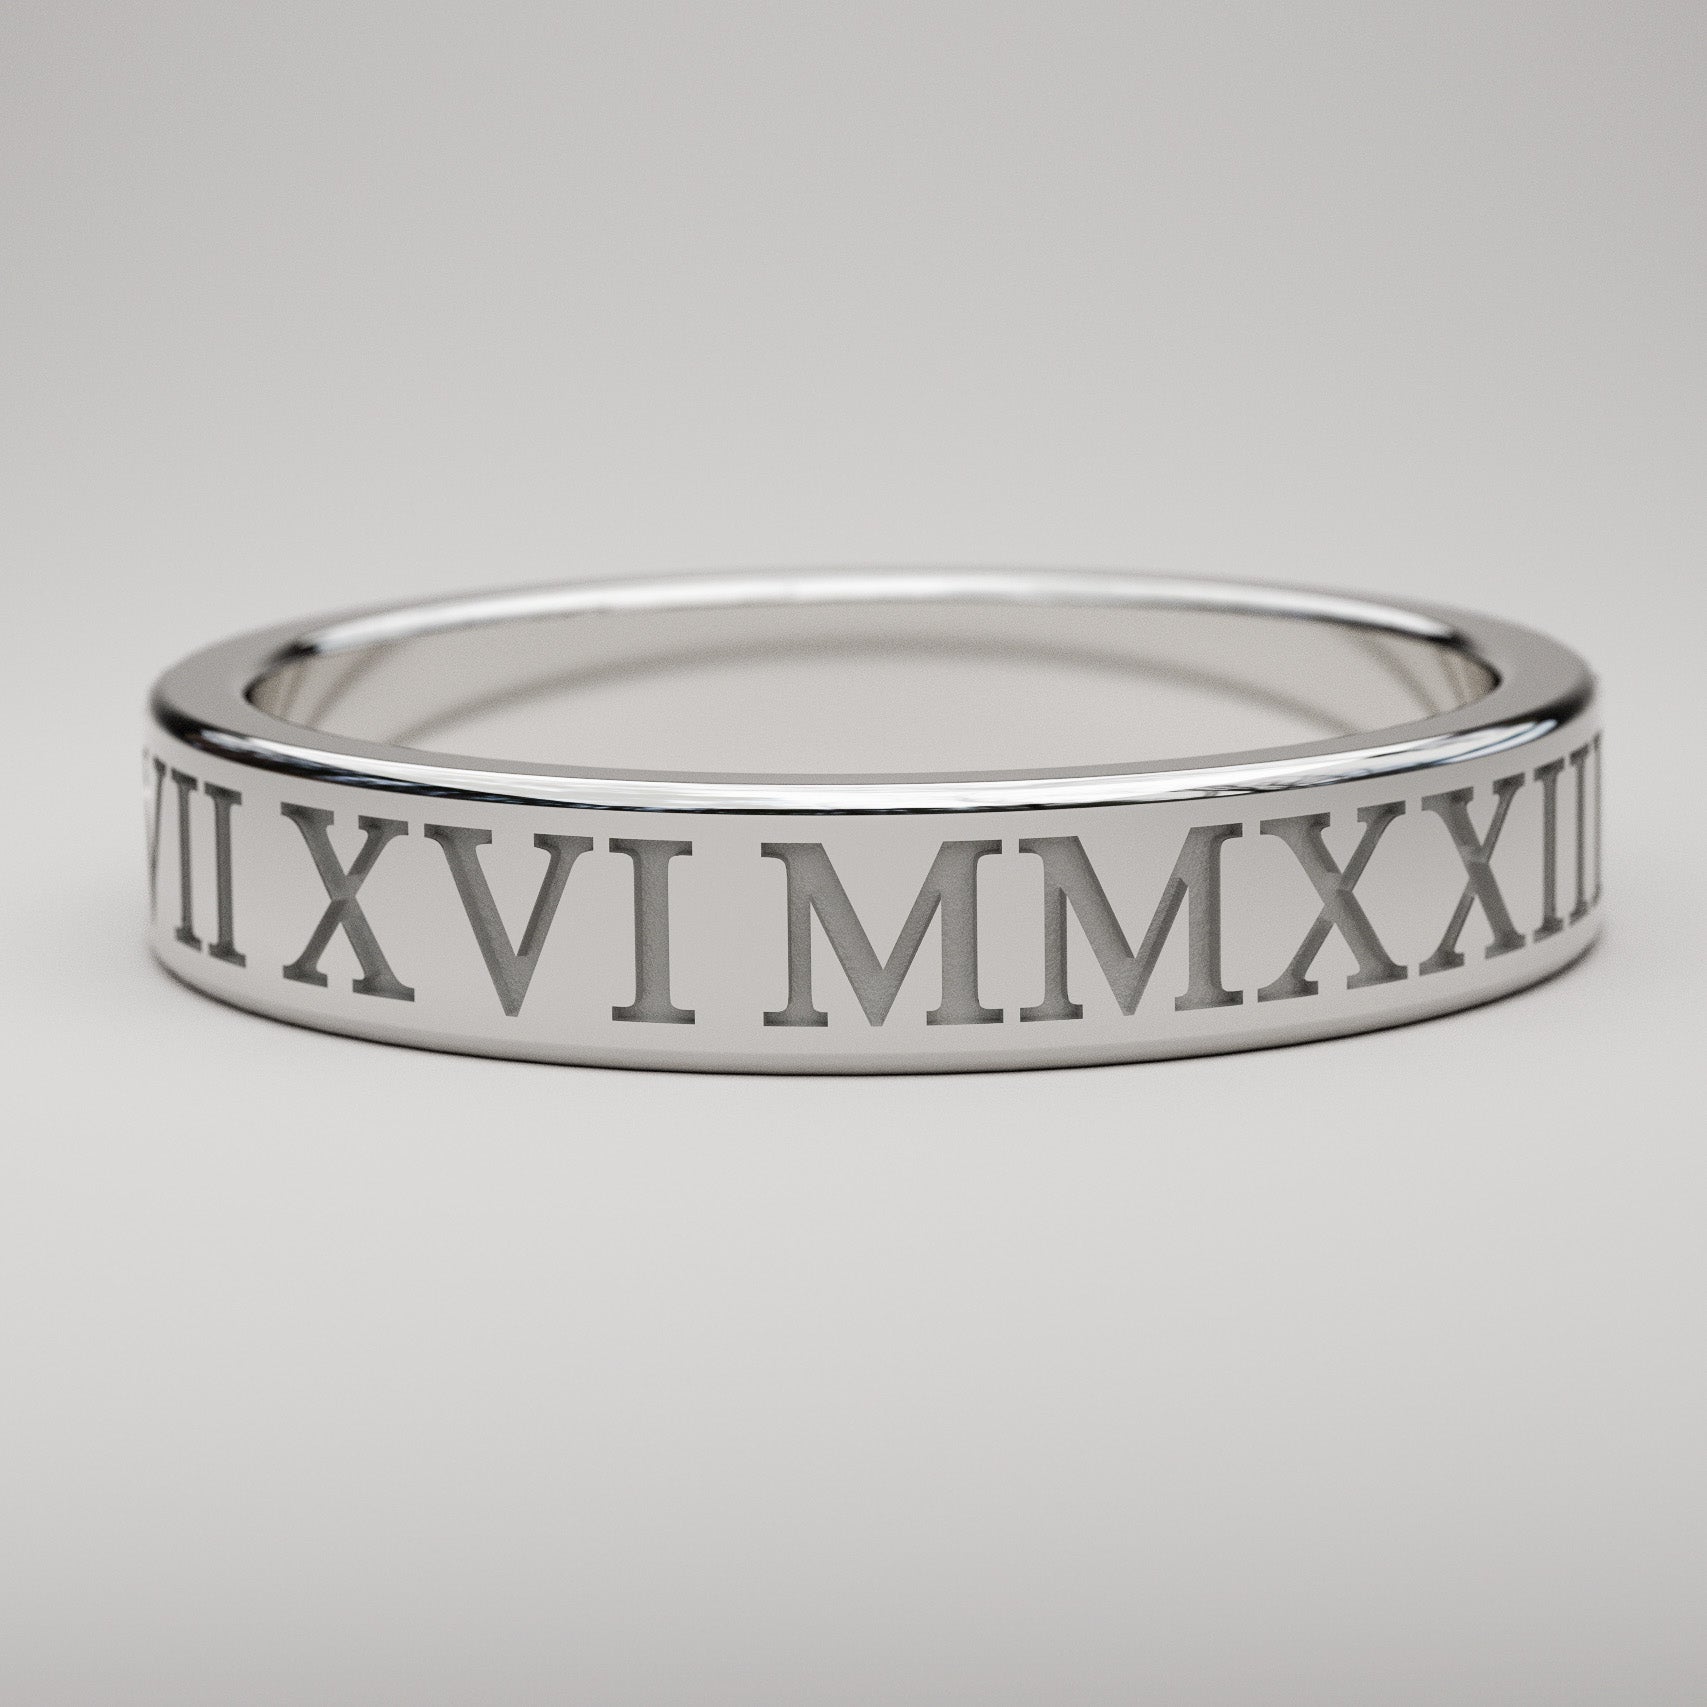 inset custom date Roman Numeral ring in white gold, 4mm wide